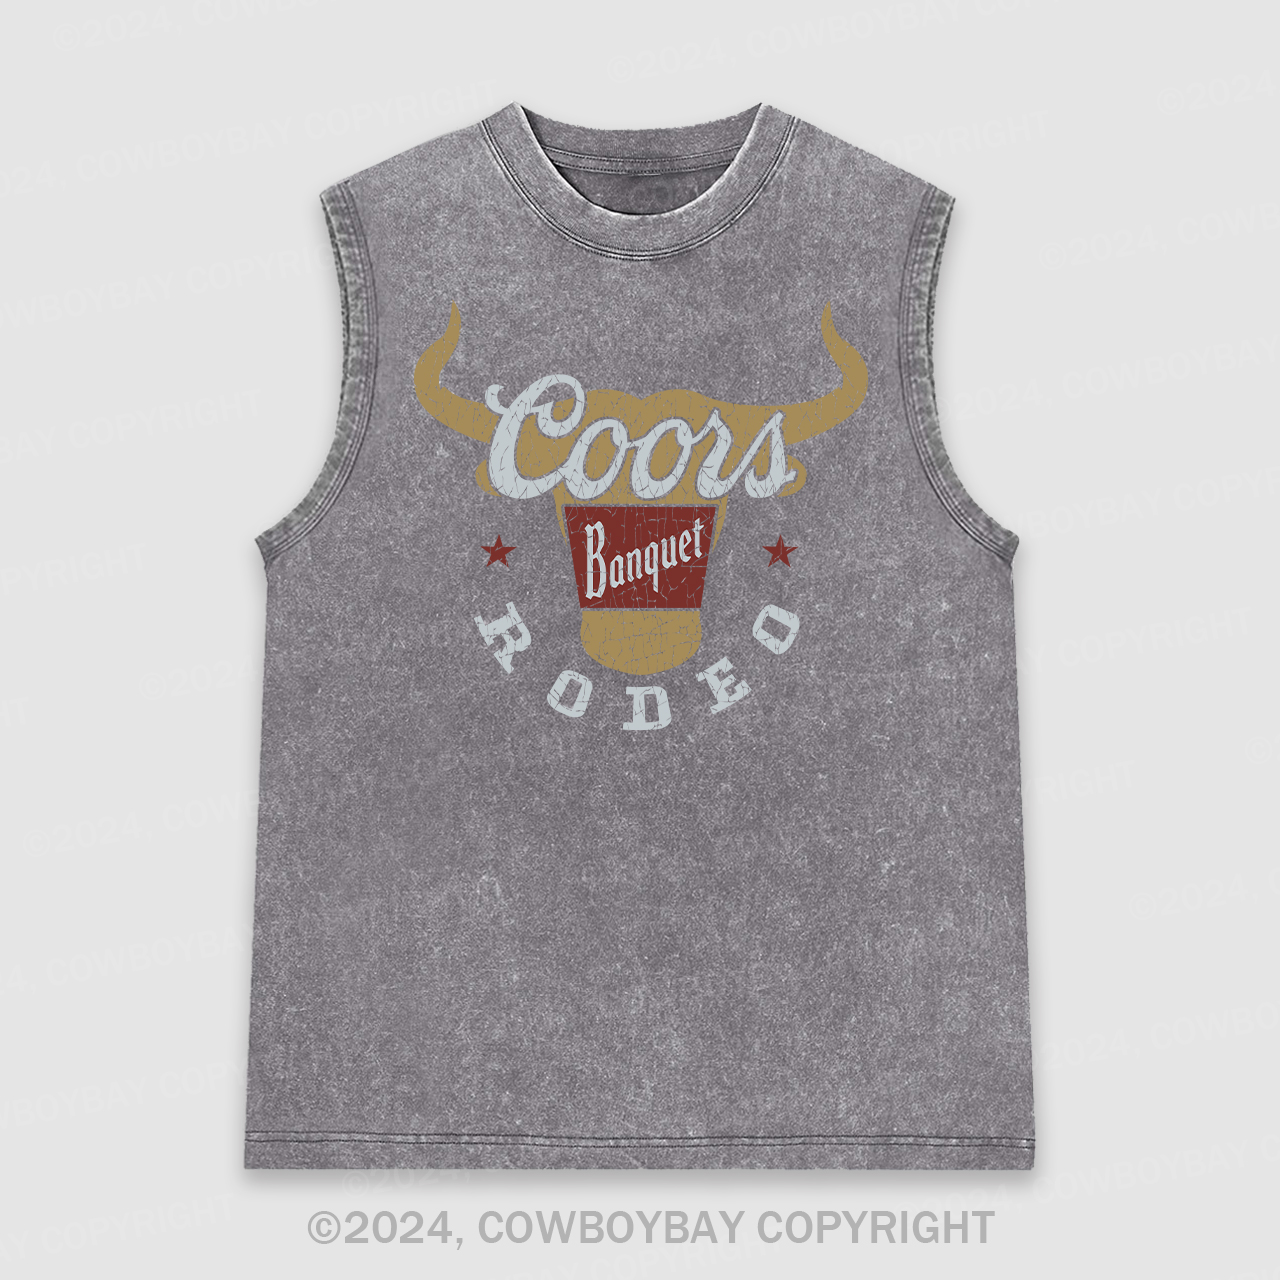 New Coors Banquet Rodeo Cowboy Washed Tanks